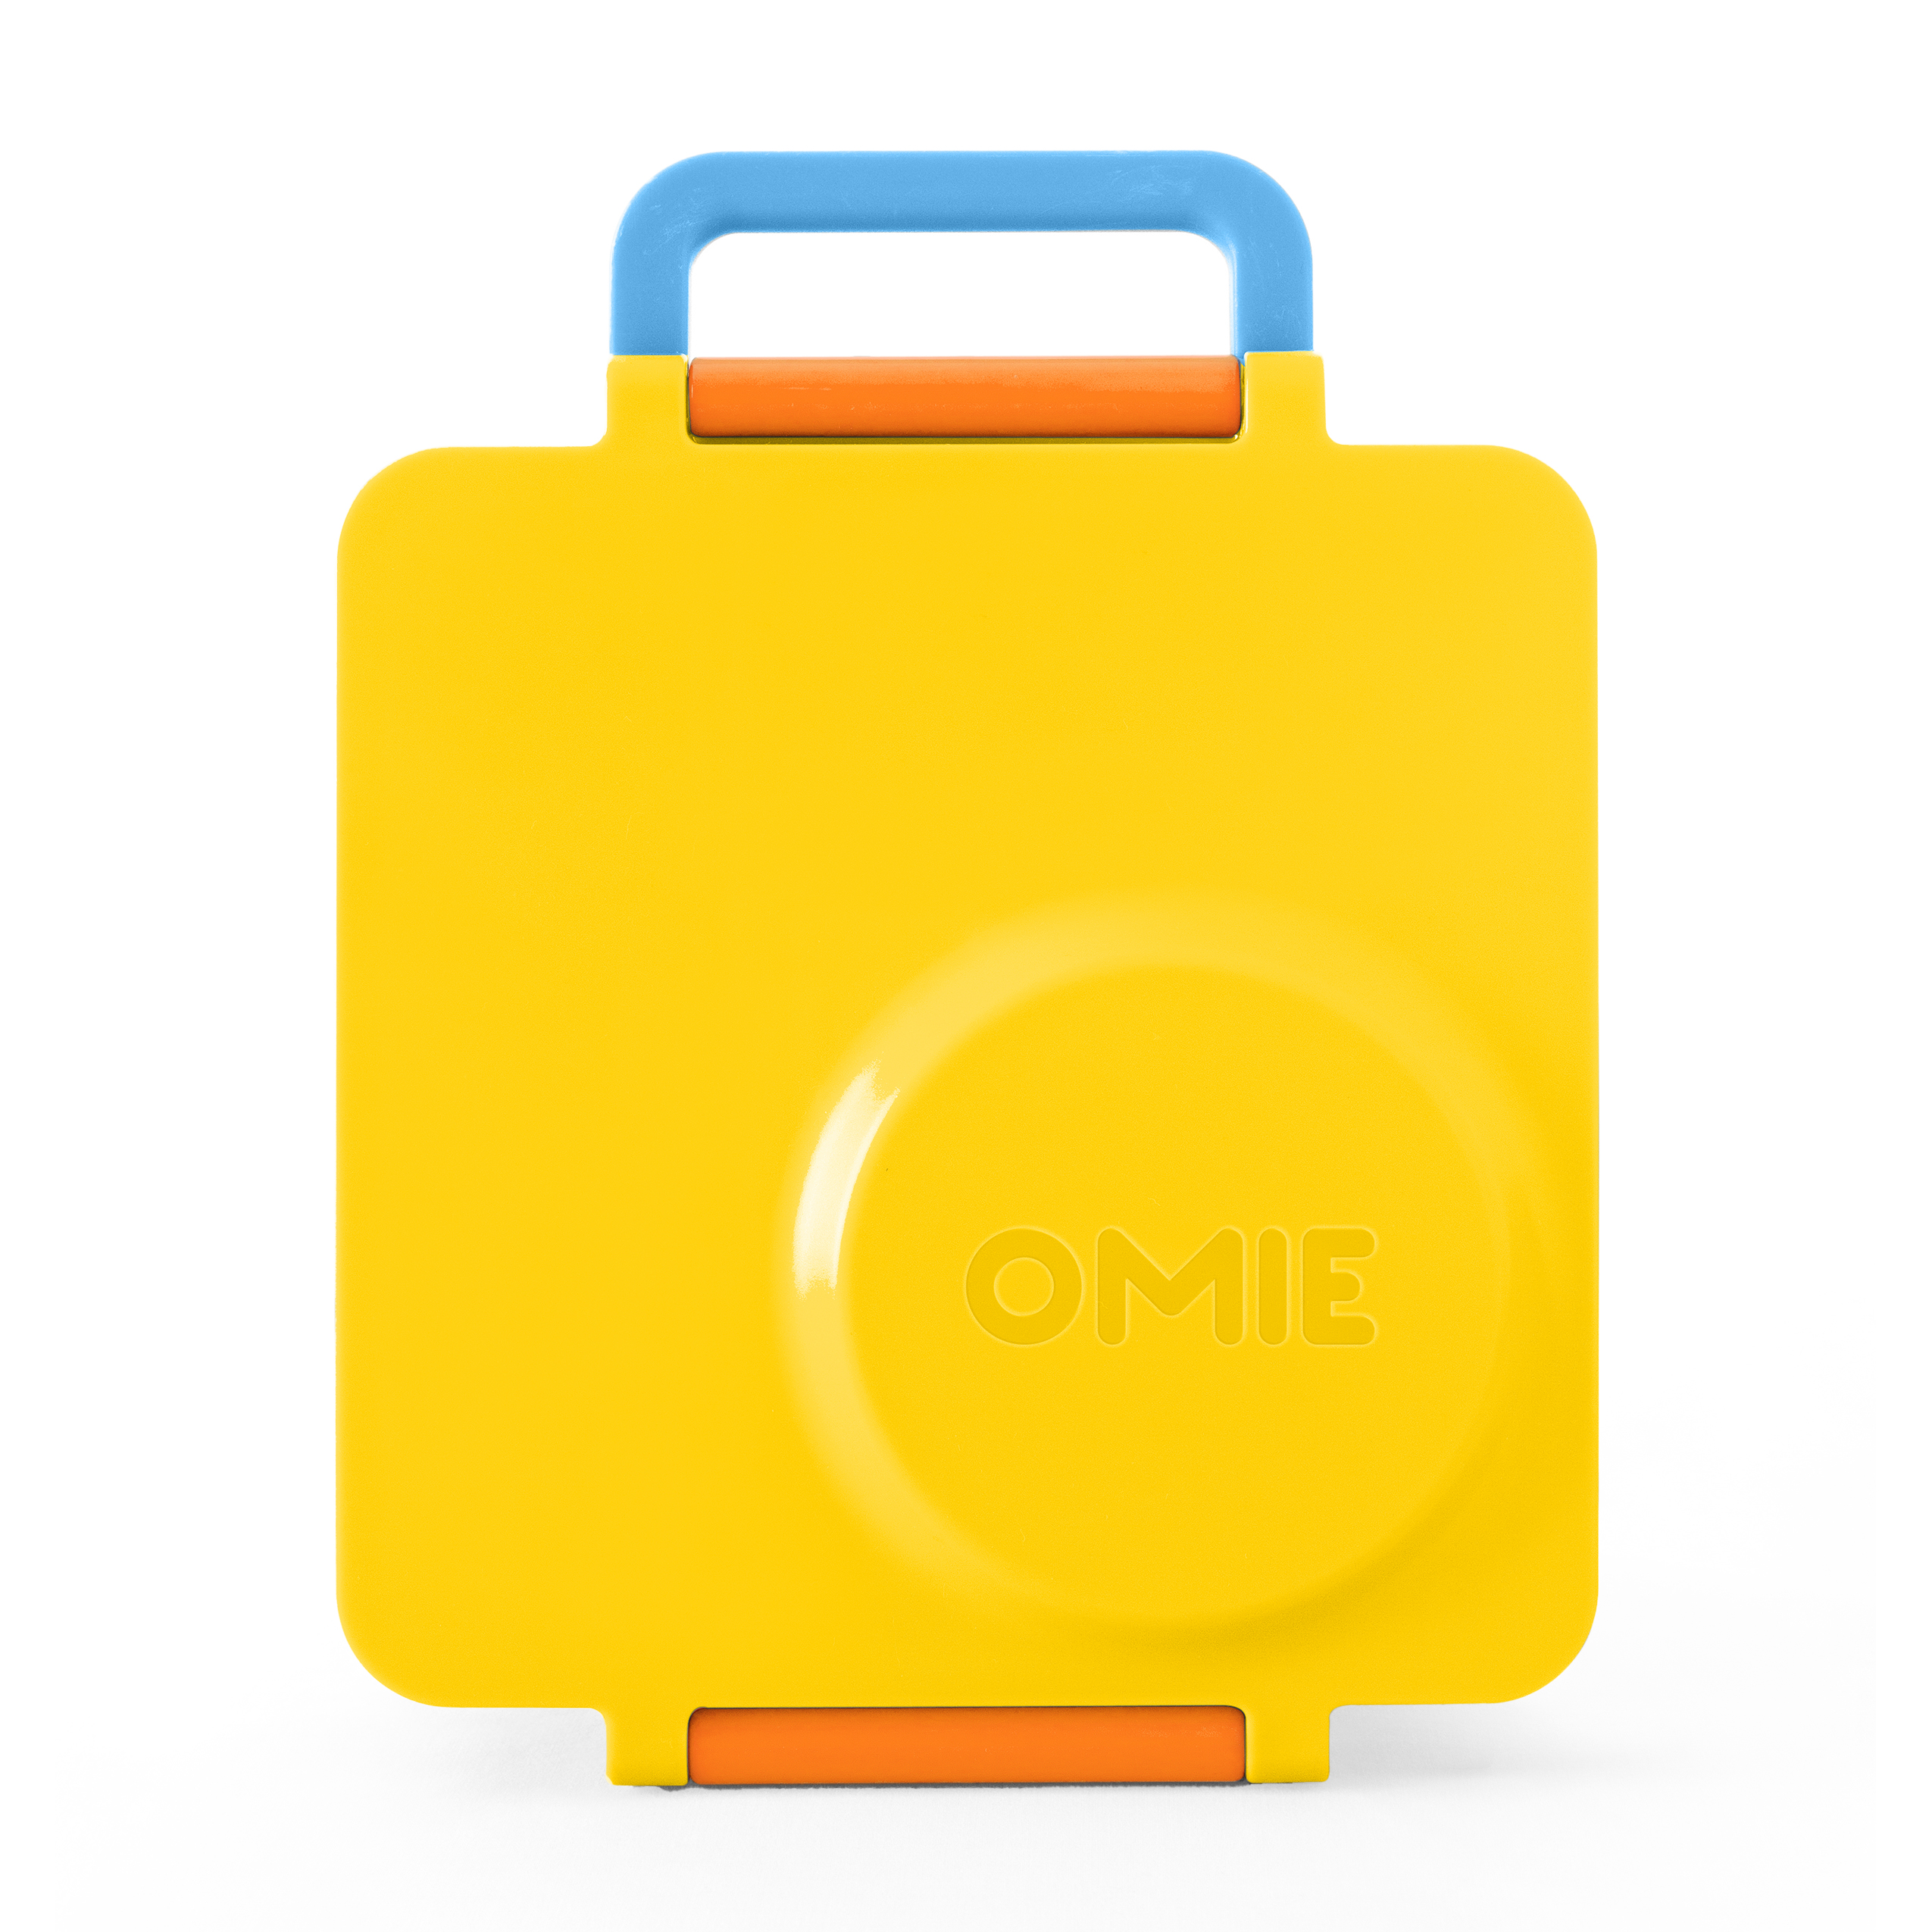 Omiebox Smarter Bento Box - Waste Free Lunch Kits That Fit 